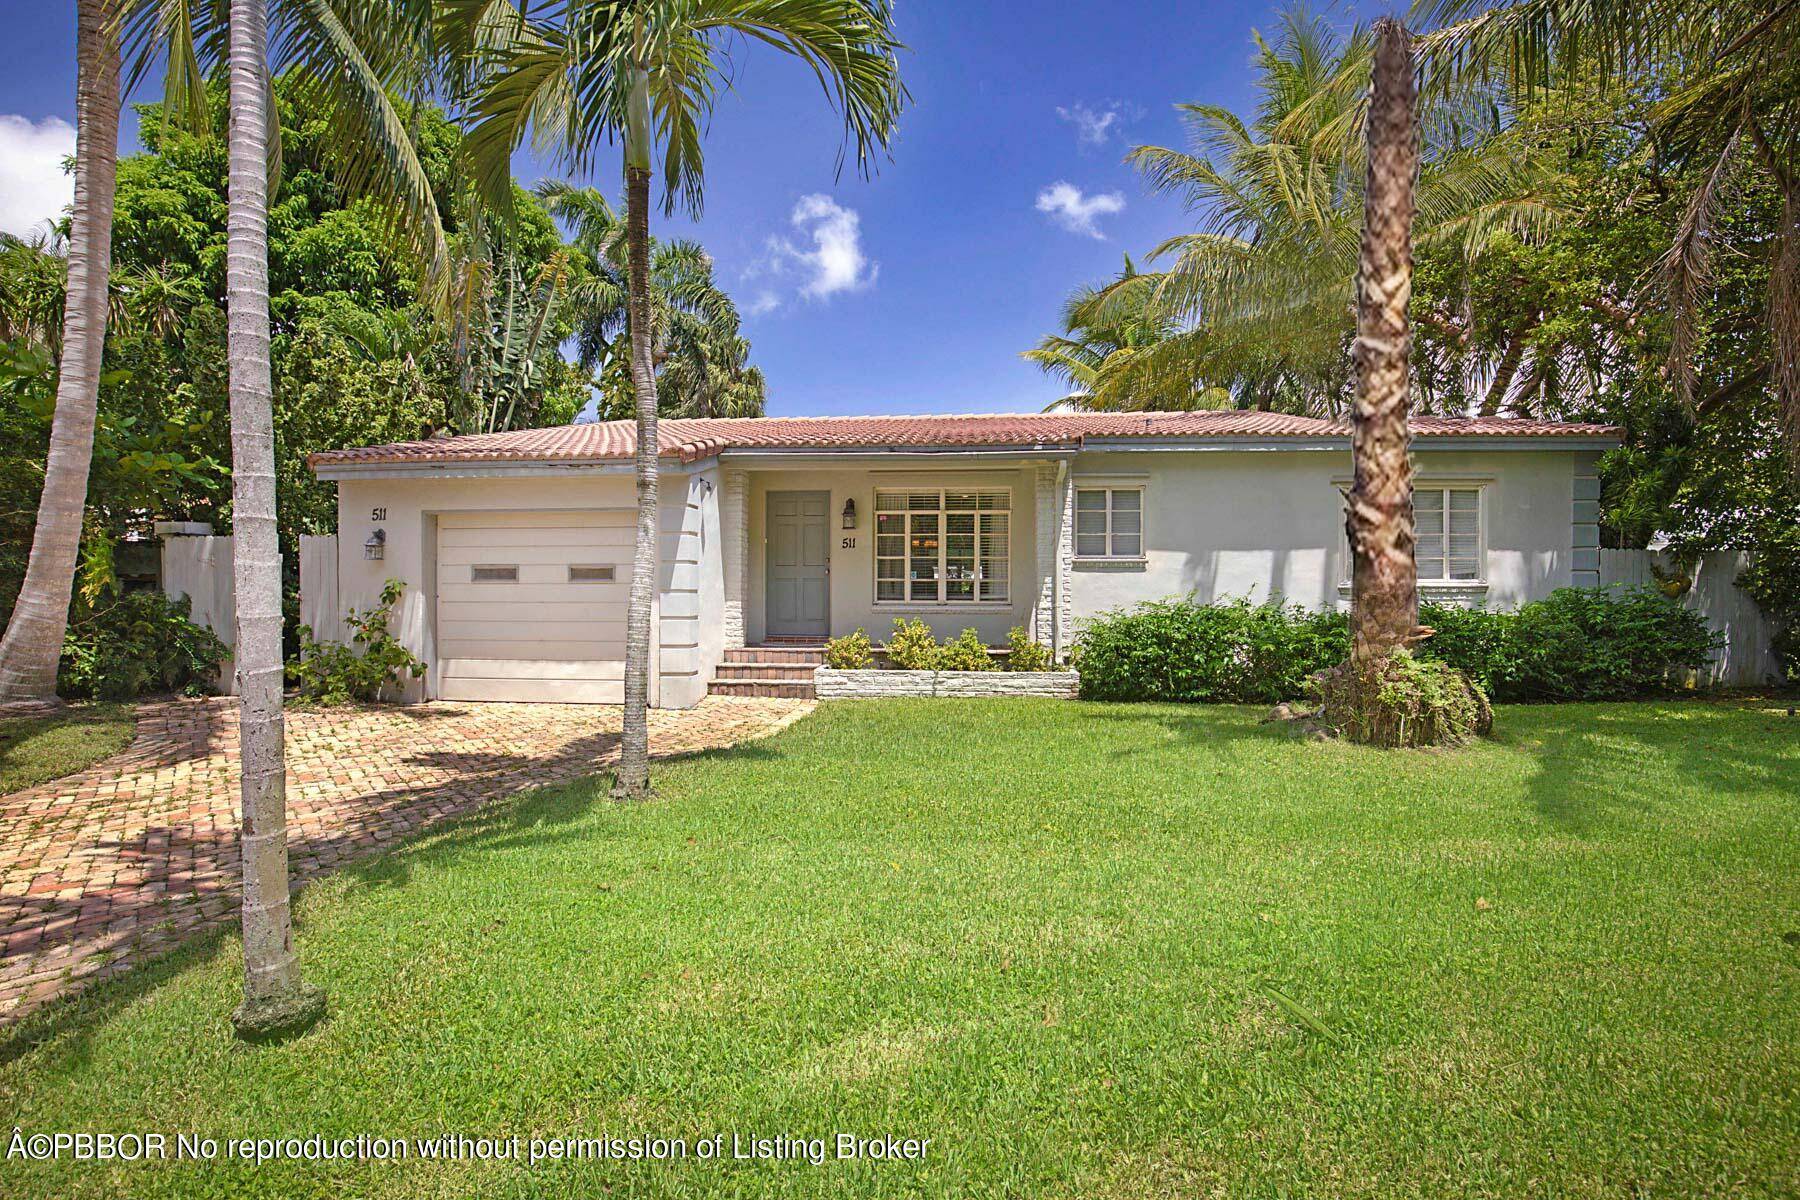 Chic Midcentury 2 bedroom 2 bath pool home in the coveted Old Historic Northwood.